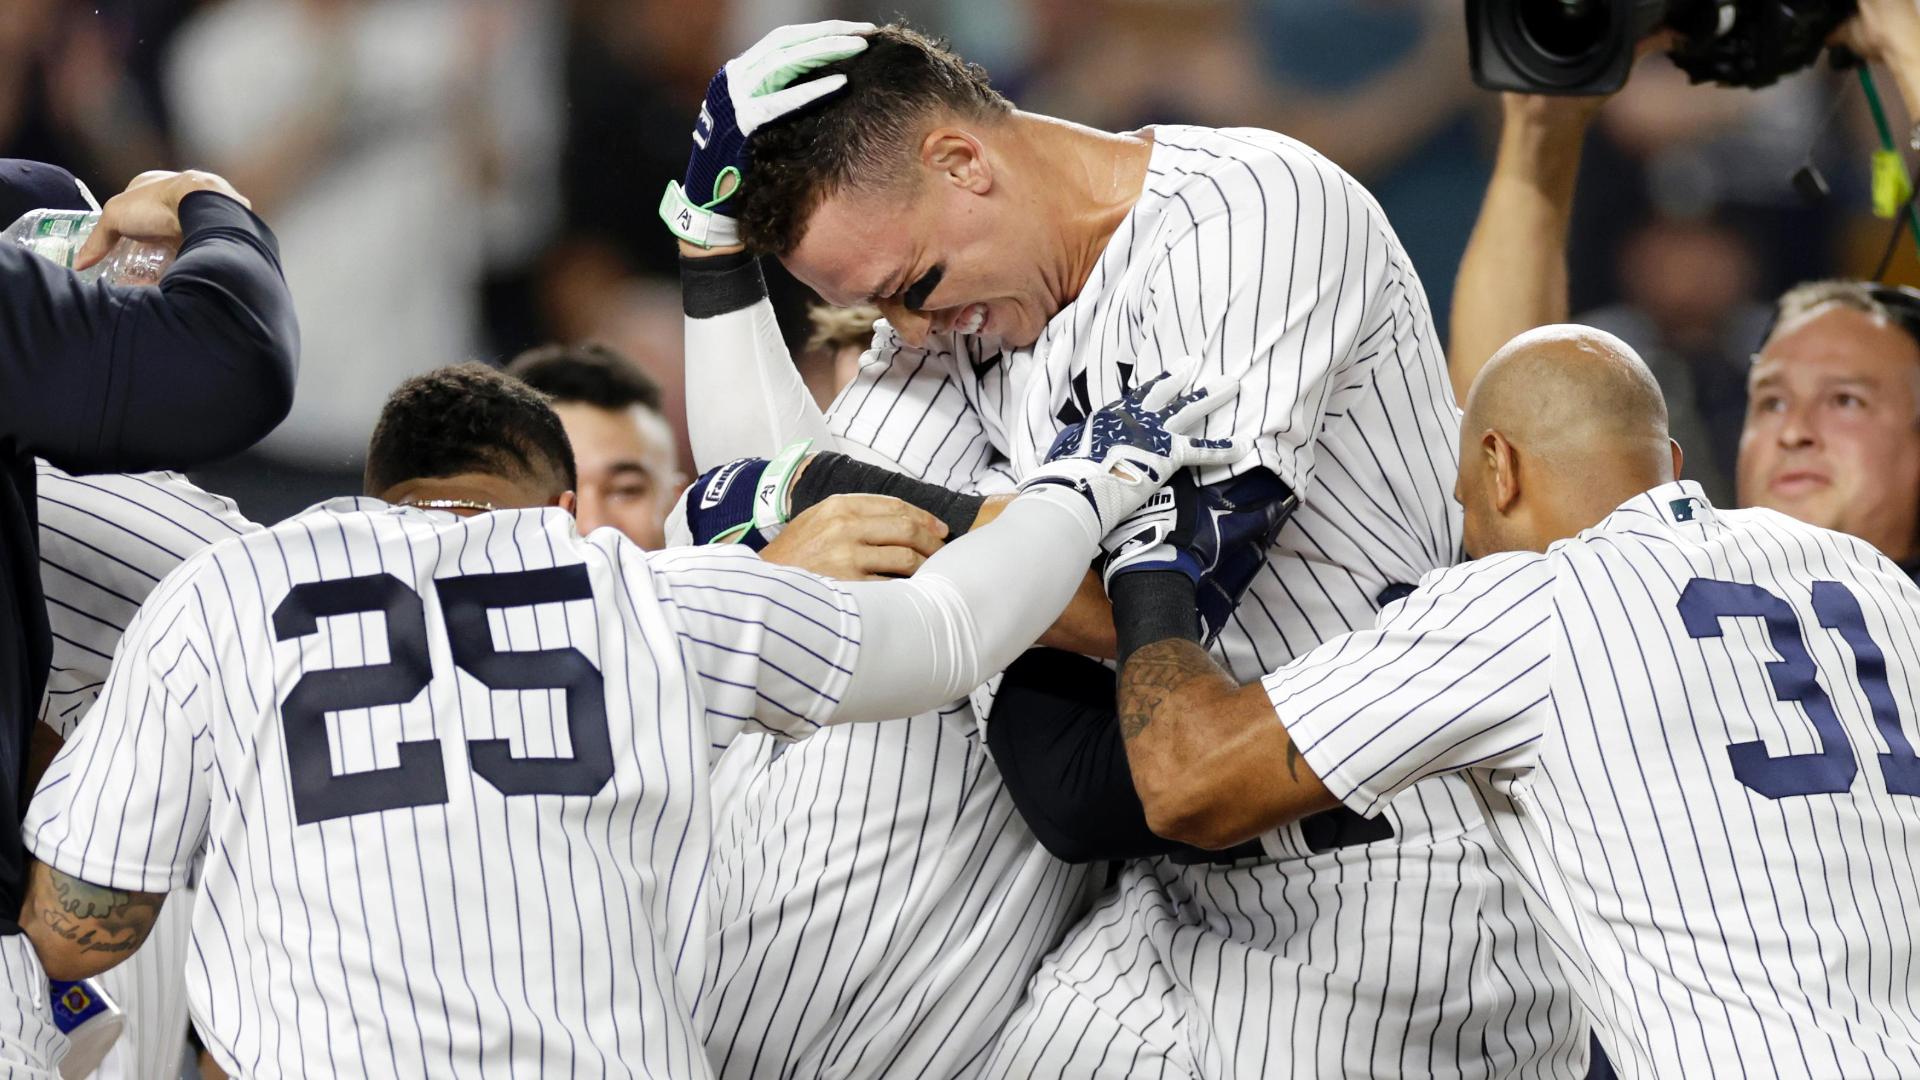 Judge's 3rd walk-off HR of year lifts Yanks over Royals 1-0 - ABC7